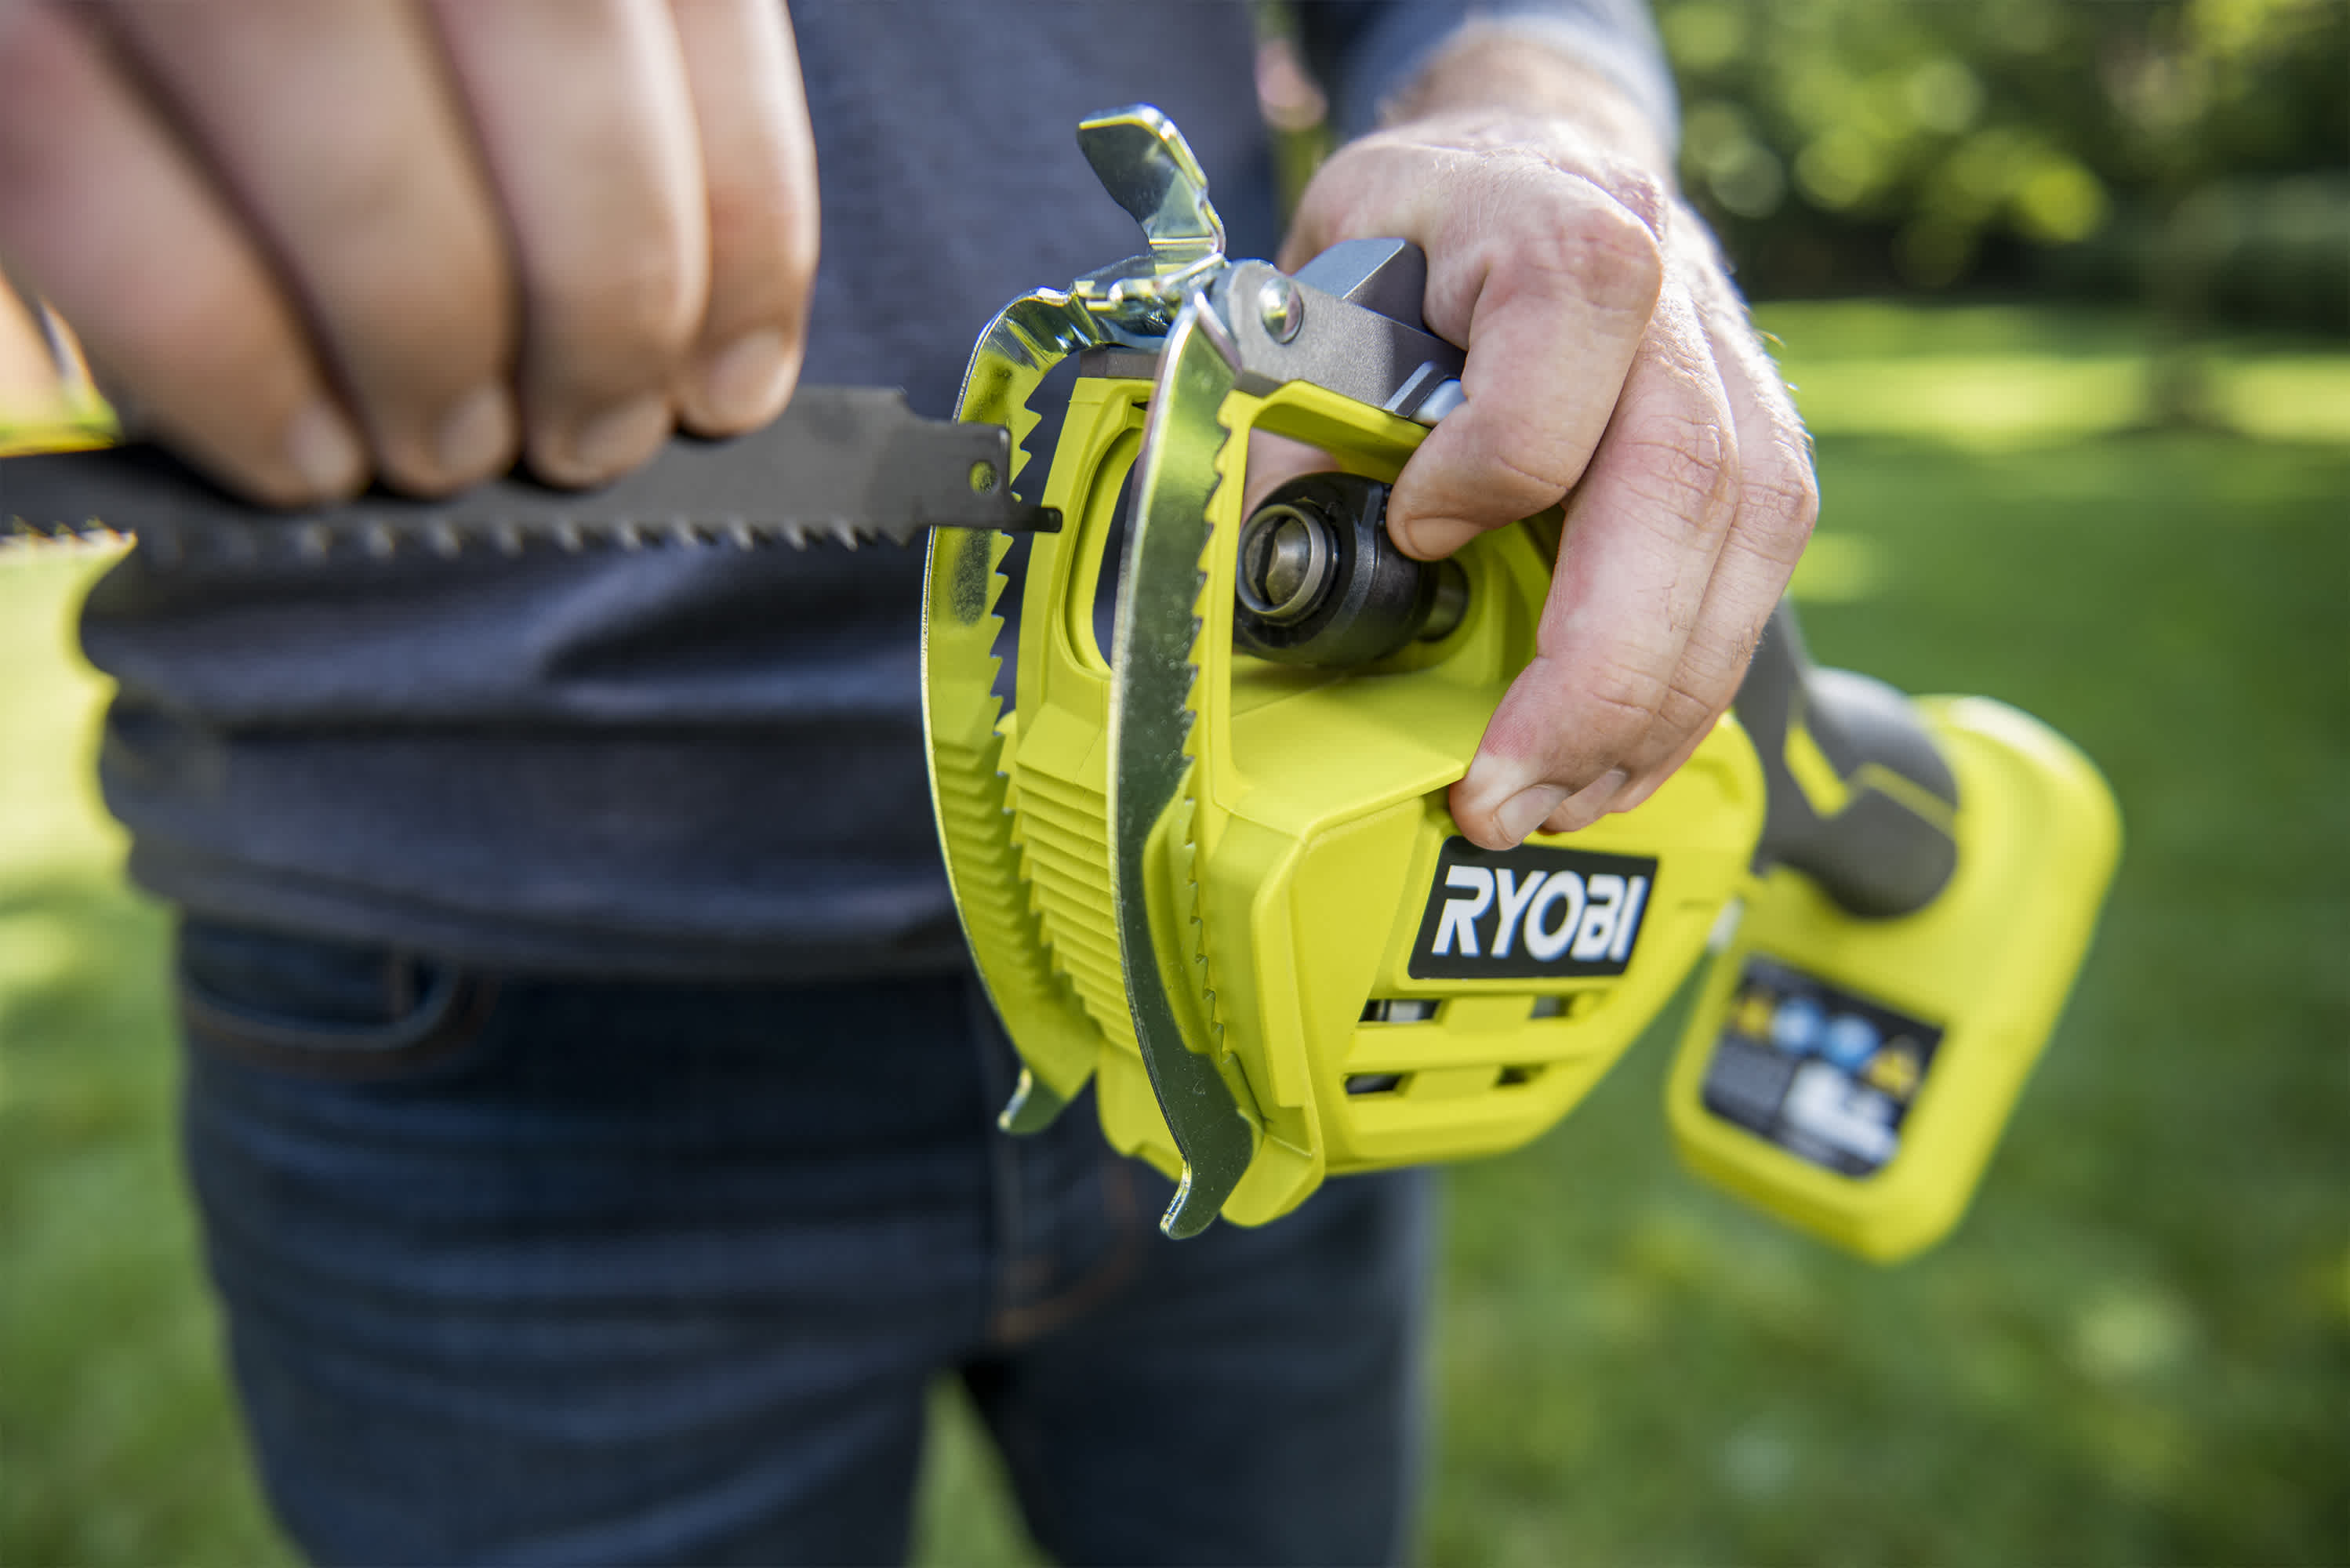 Product Features Image for 18V ONE+ ONE-HANDED PRUNING RECIPROCATING SAW KIT.